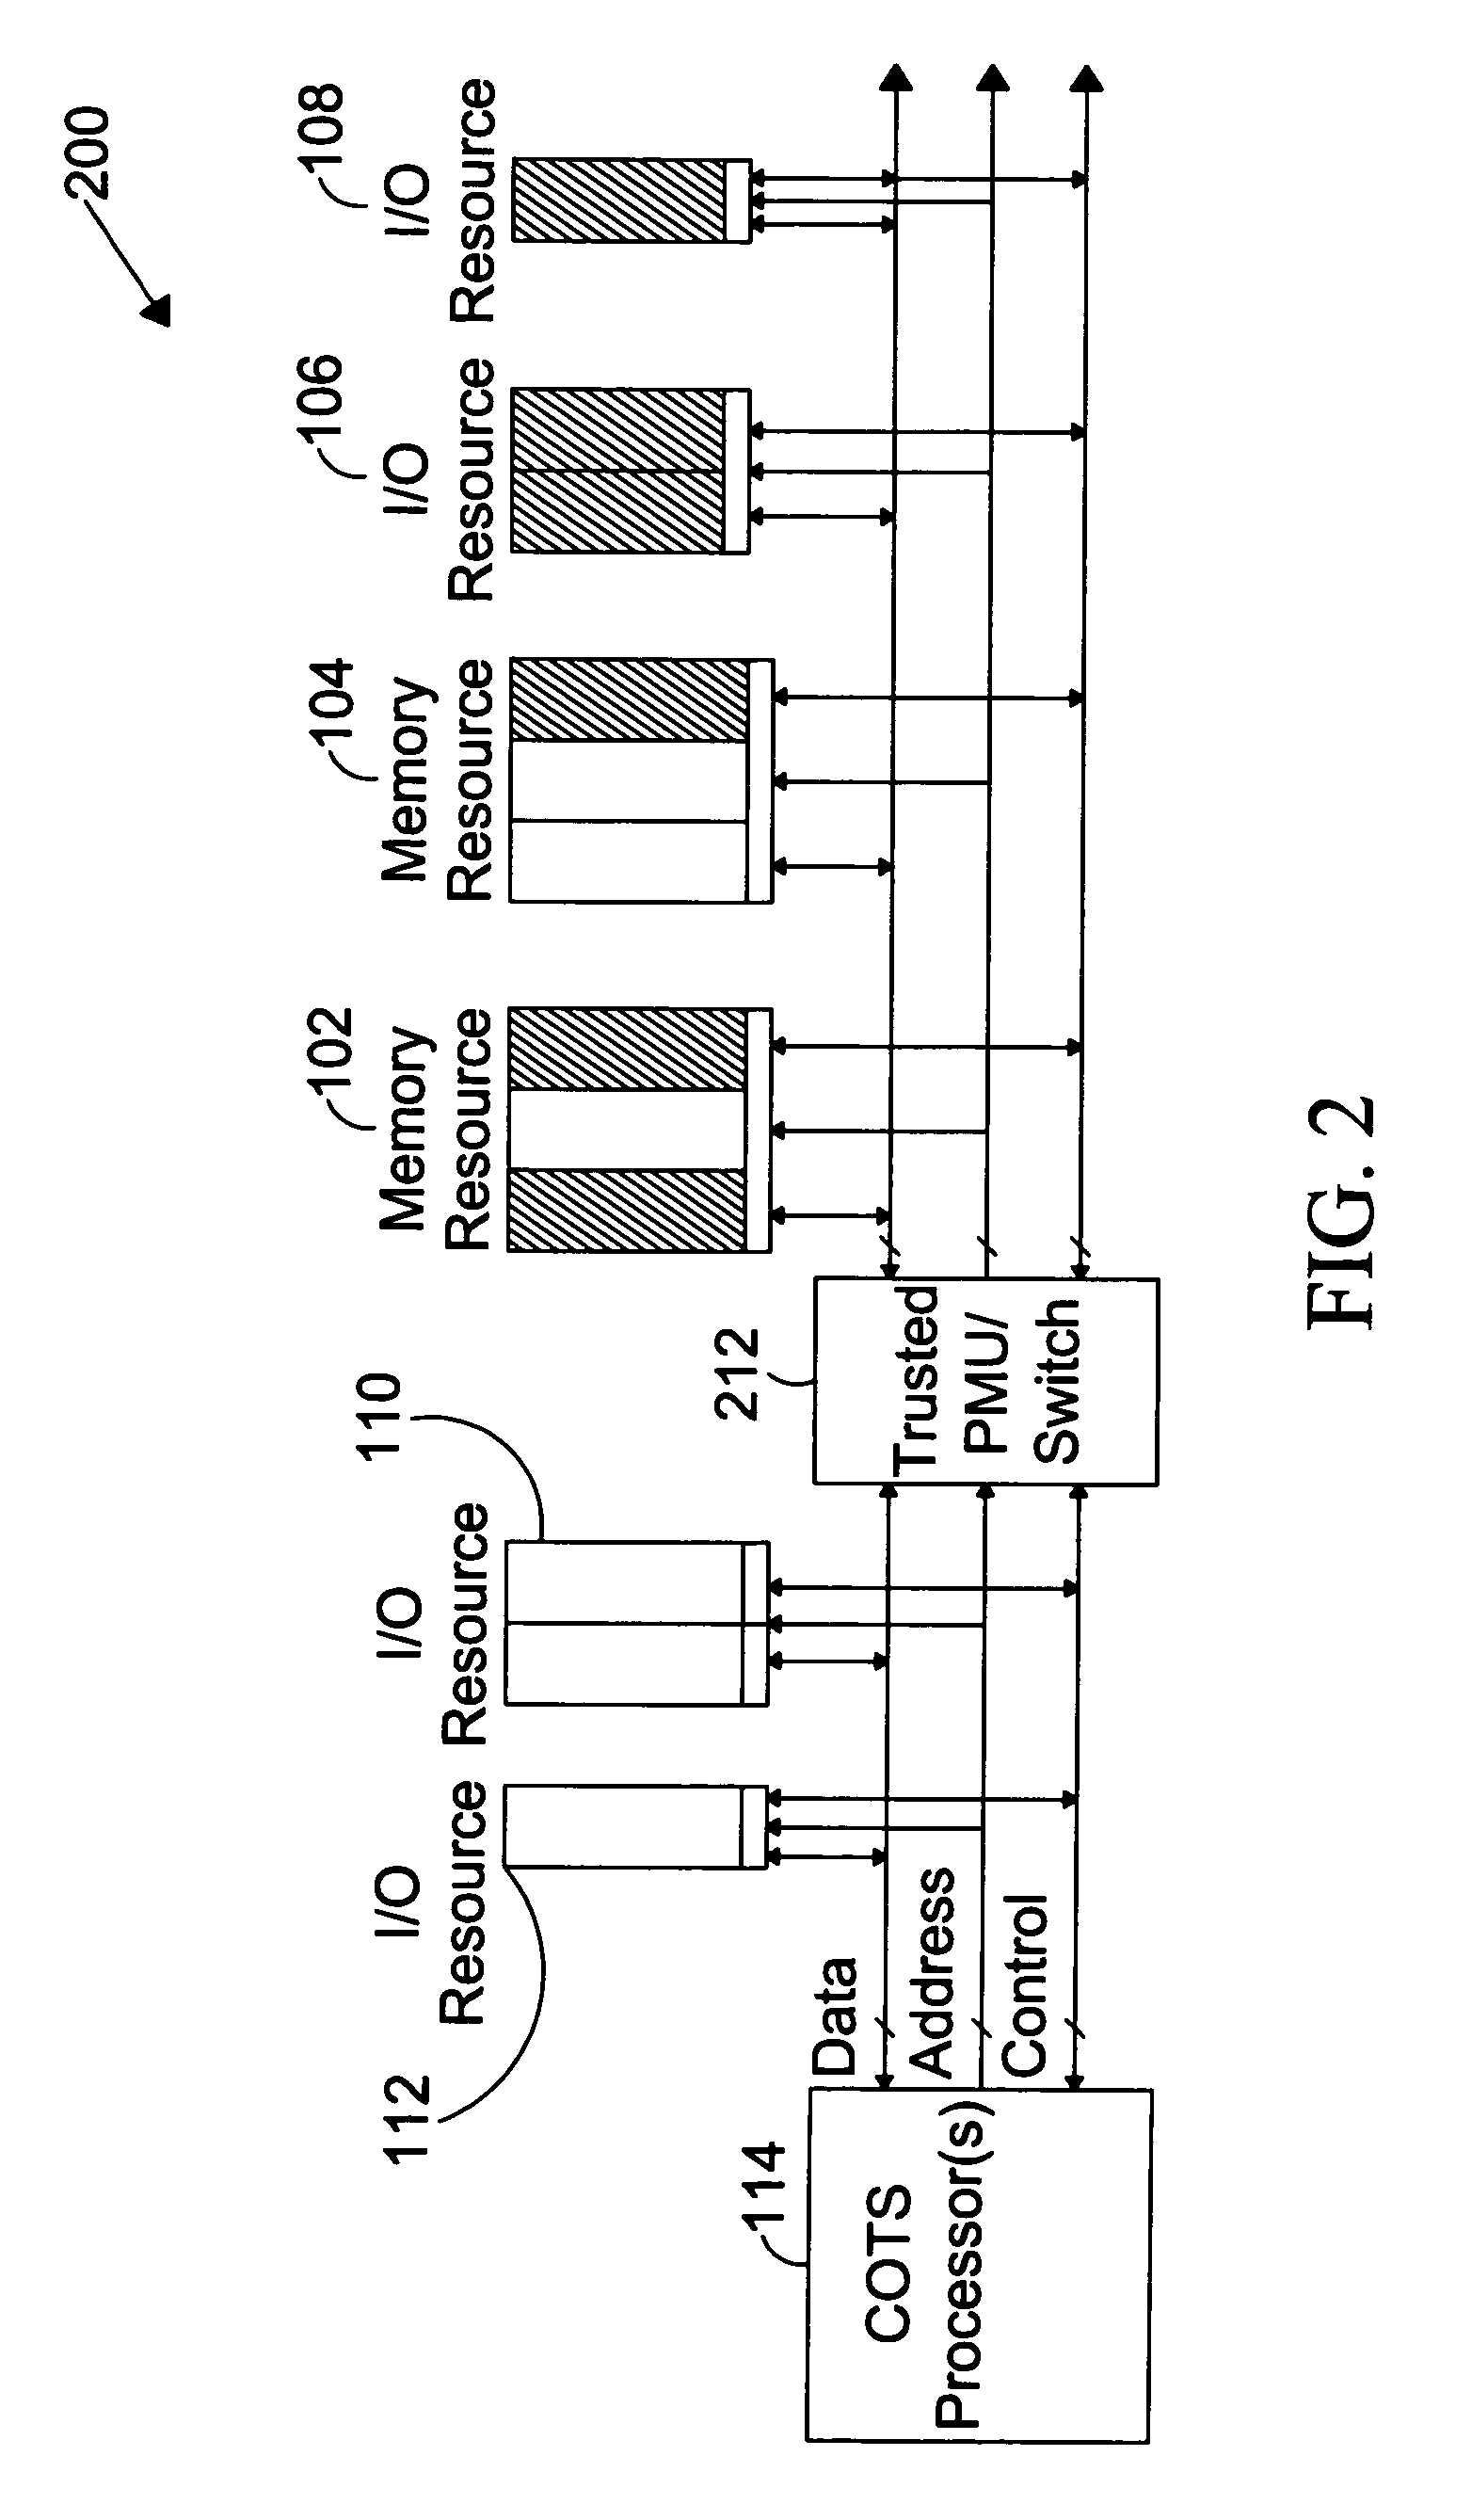 System for providing secure and trusted computing environments